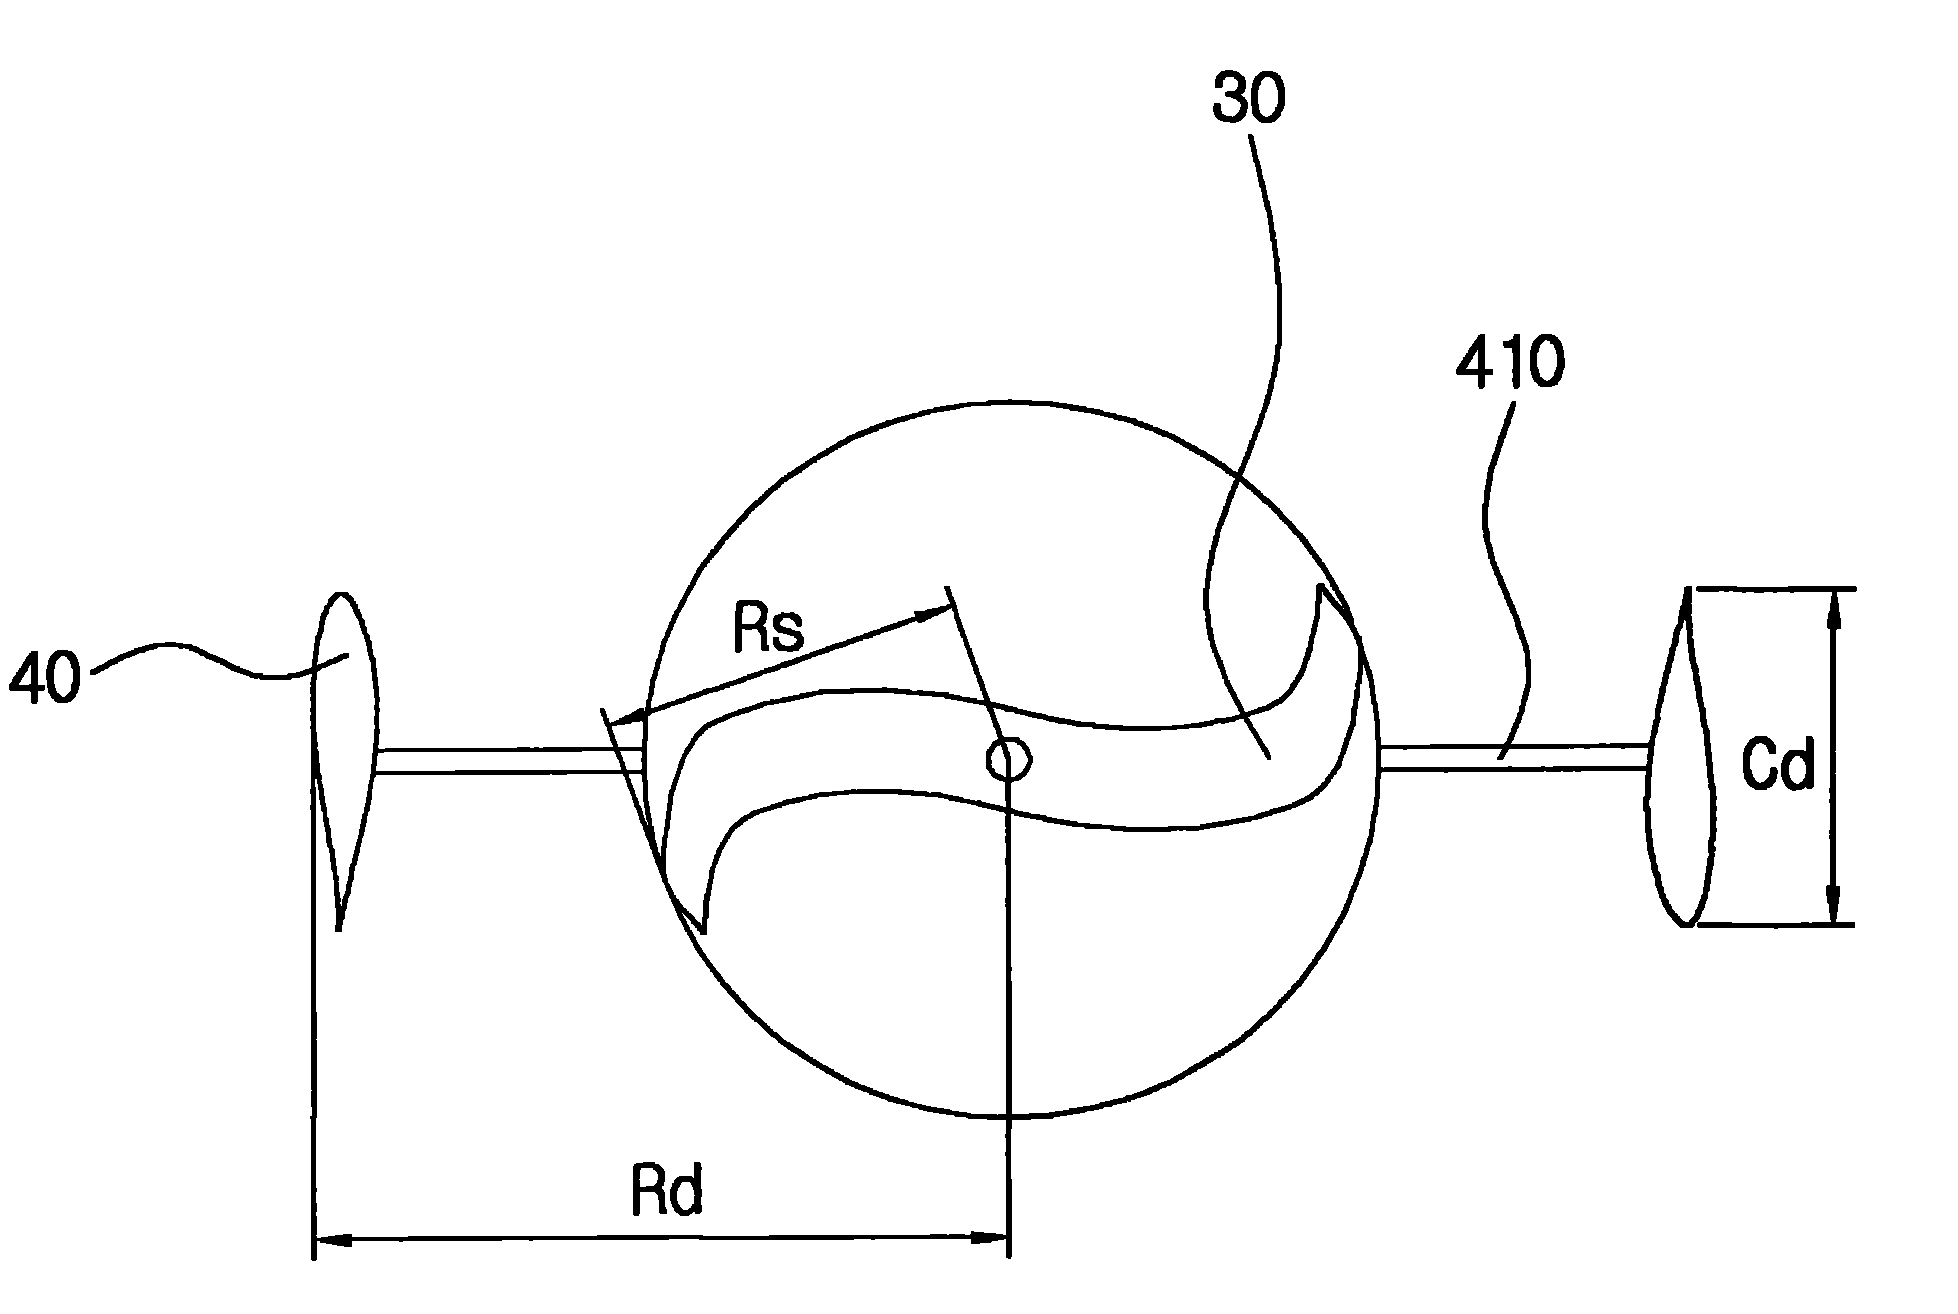 Composite type wind power generation device